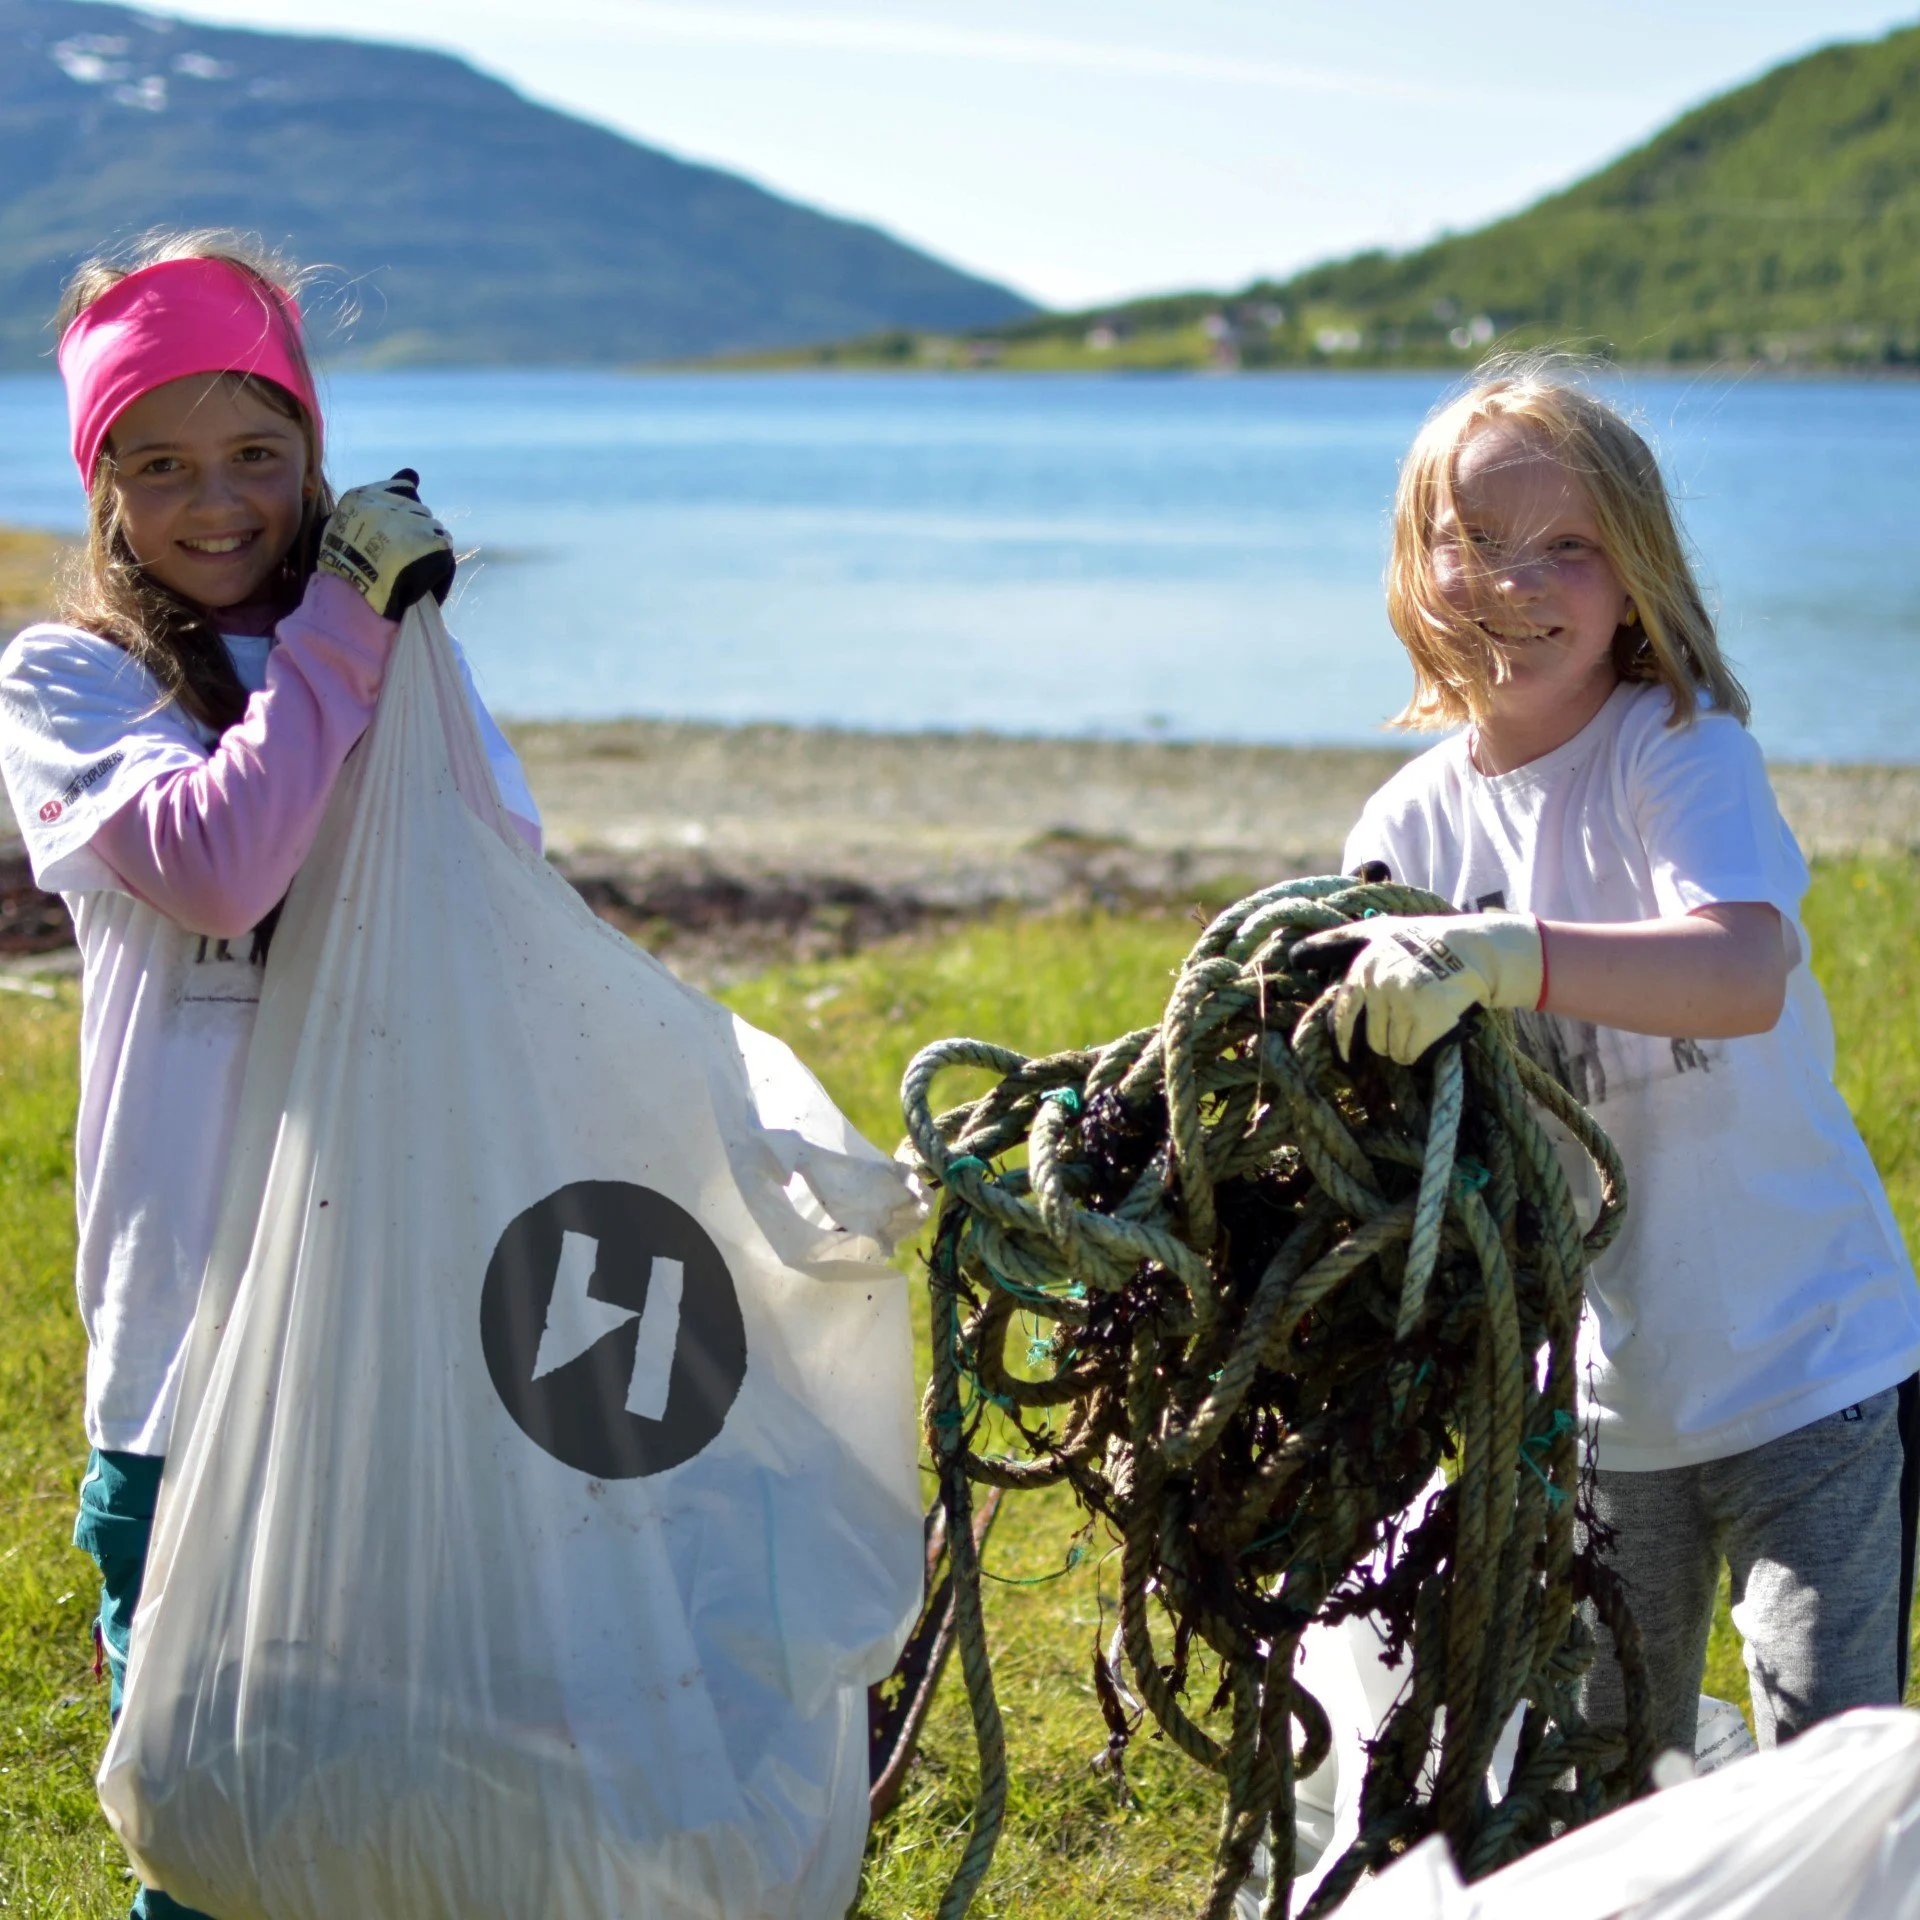 Two young girls, young explorers, cleaning the beach. Both are carrying loads of old ropes and trash found